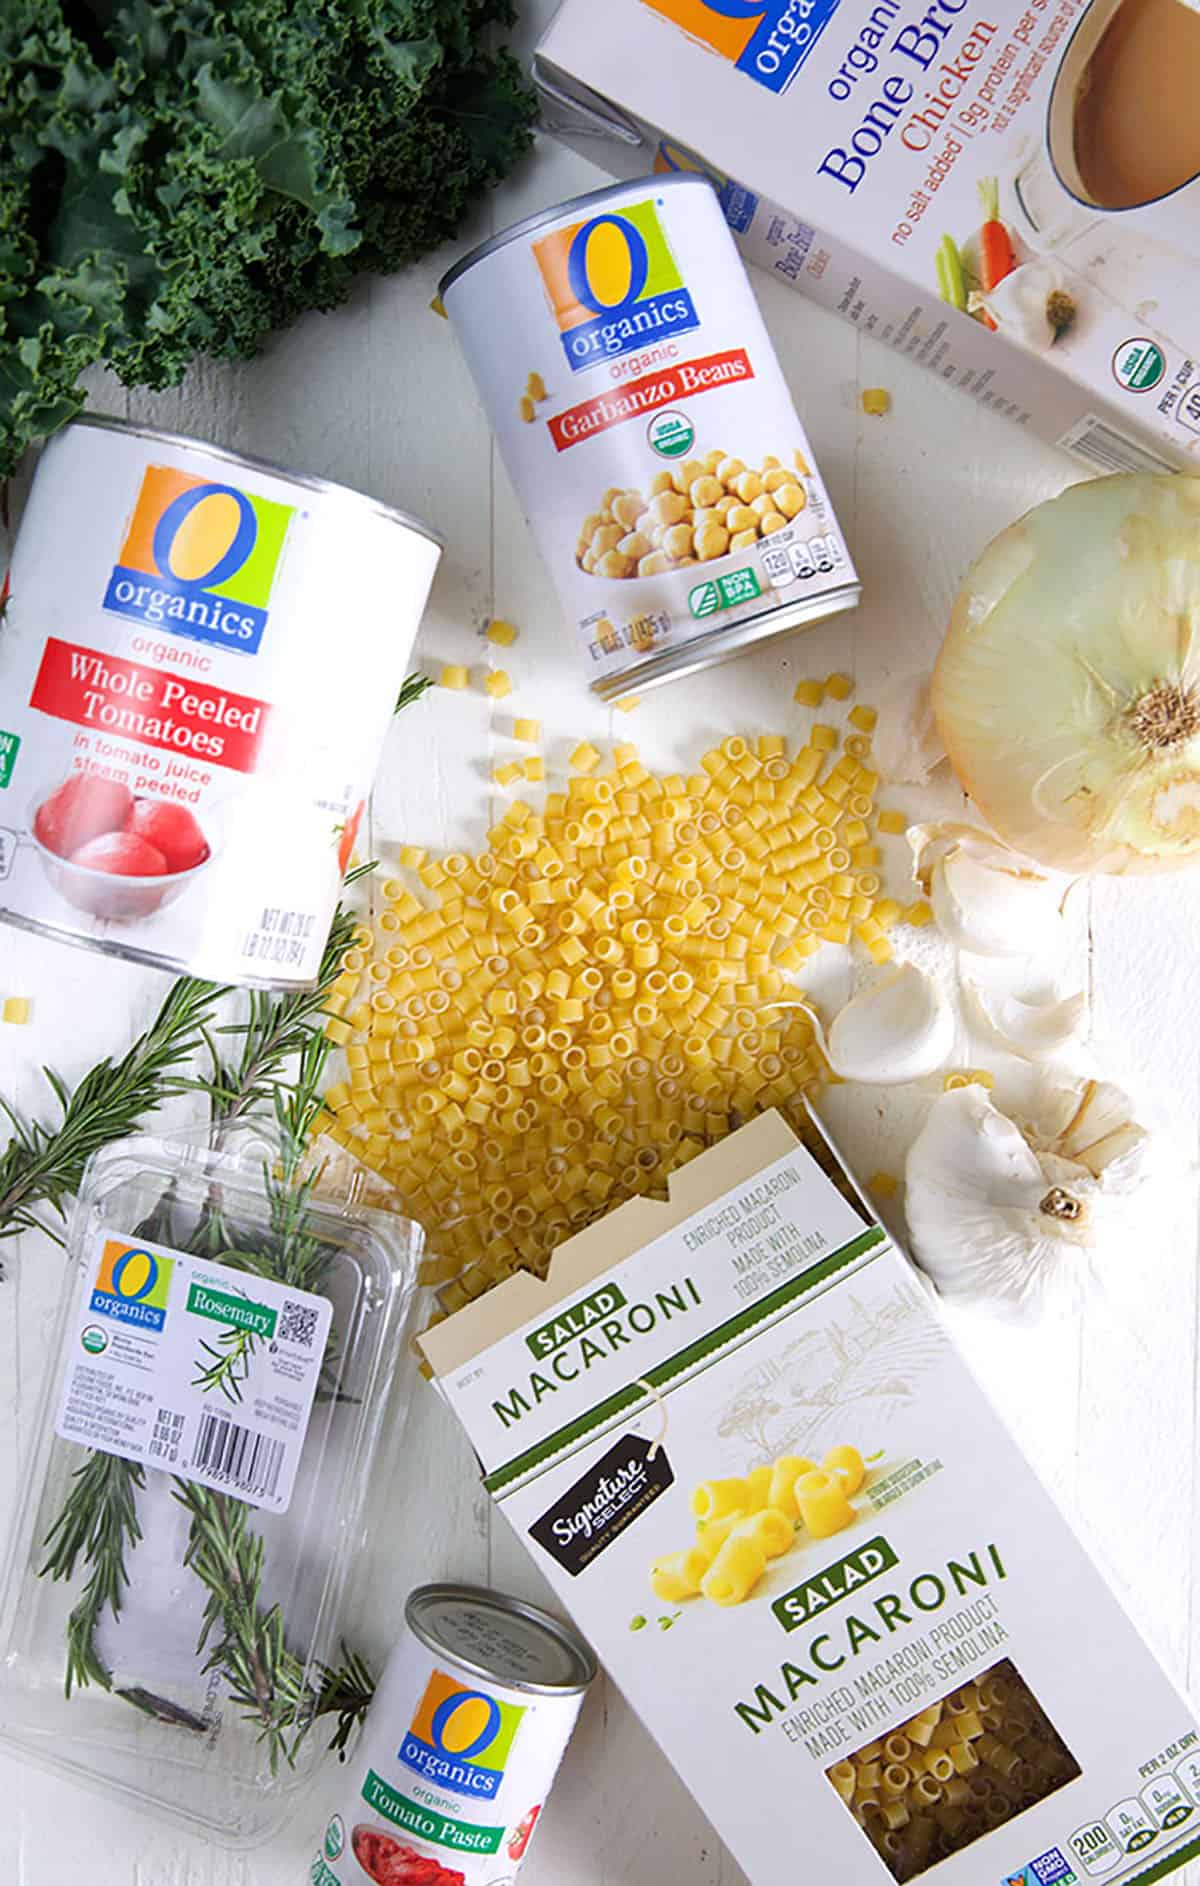 O organics products from ACME Markets for making Pasta e Ceci